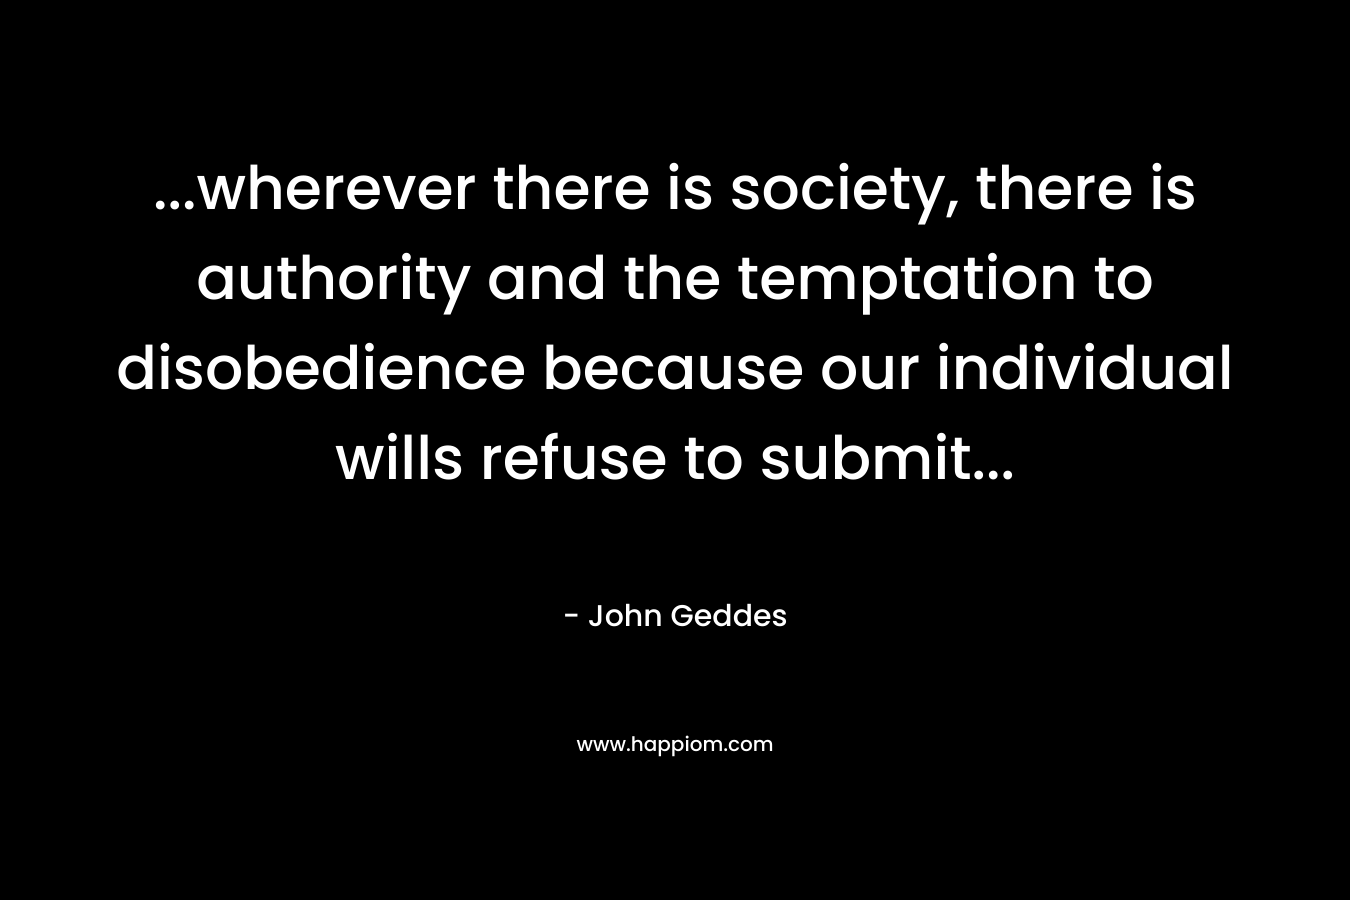 ...wherever there is society, there is authority and the temptation to disobedience because our individual wills refuse to submit...